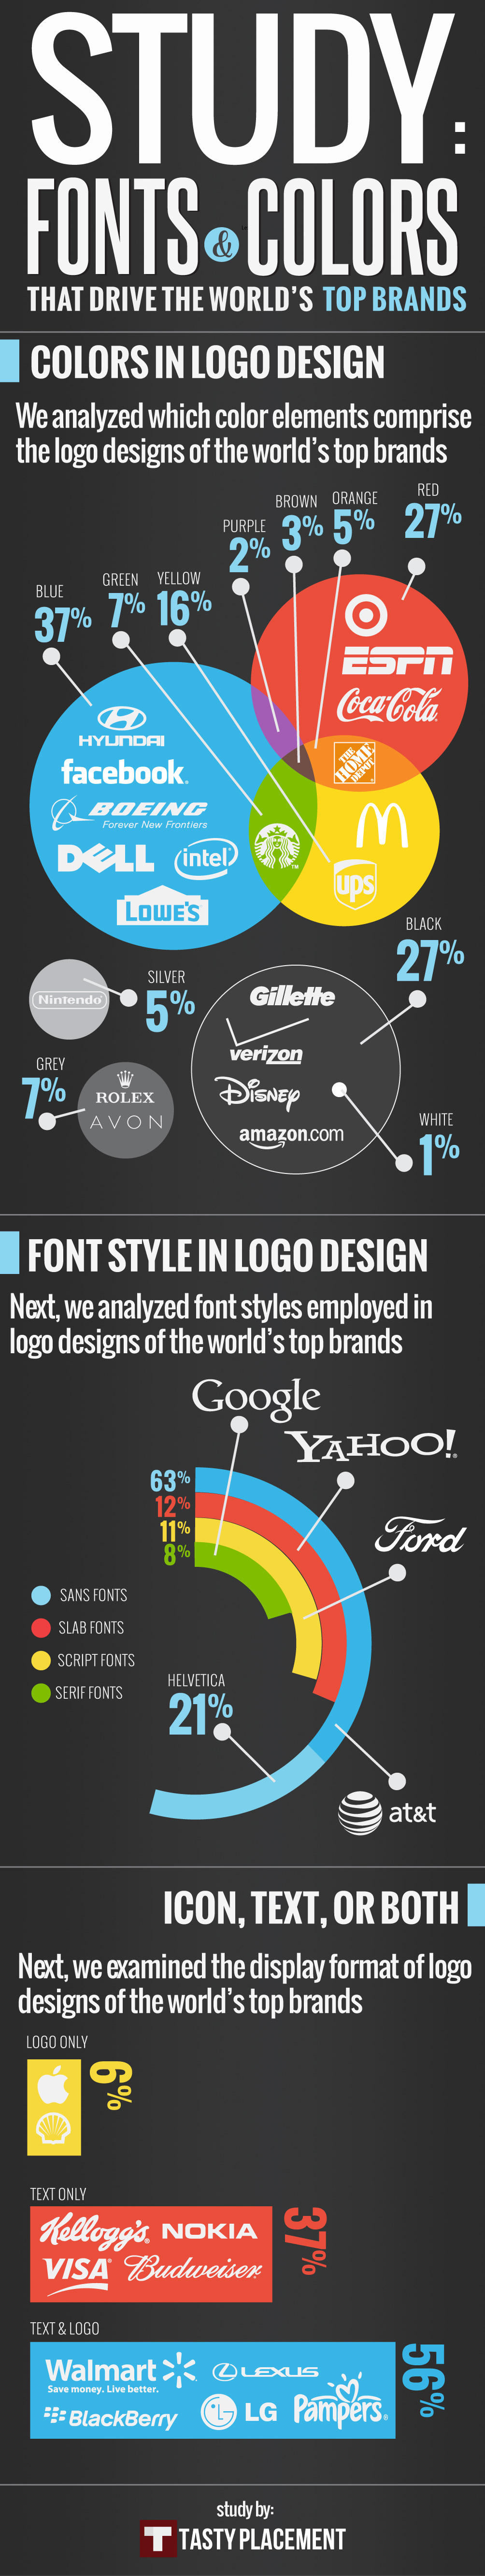 fonts--colors-that-drive-the-worlds-top-brands_5151f5dac49a0